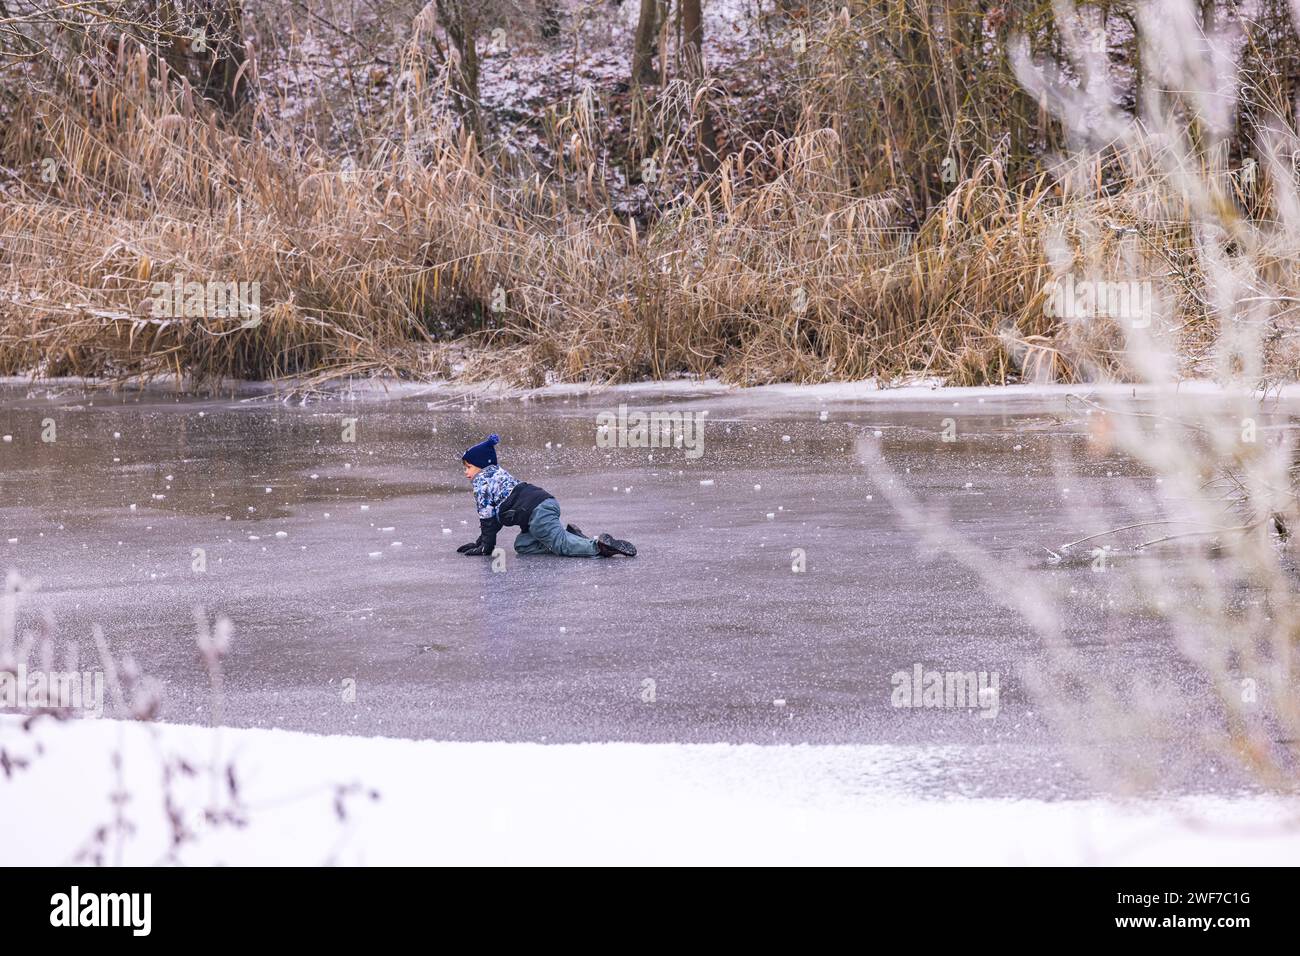 A child on a frozen lake in winter is risky and life-threatening, Riedstadt, December 18th, 2022 Stock Photo